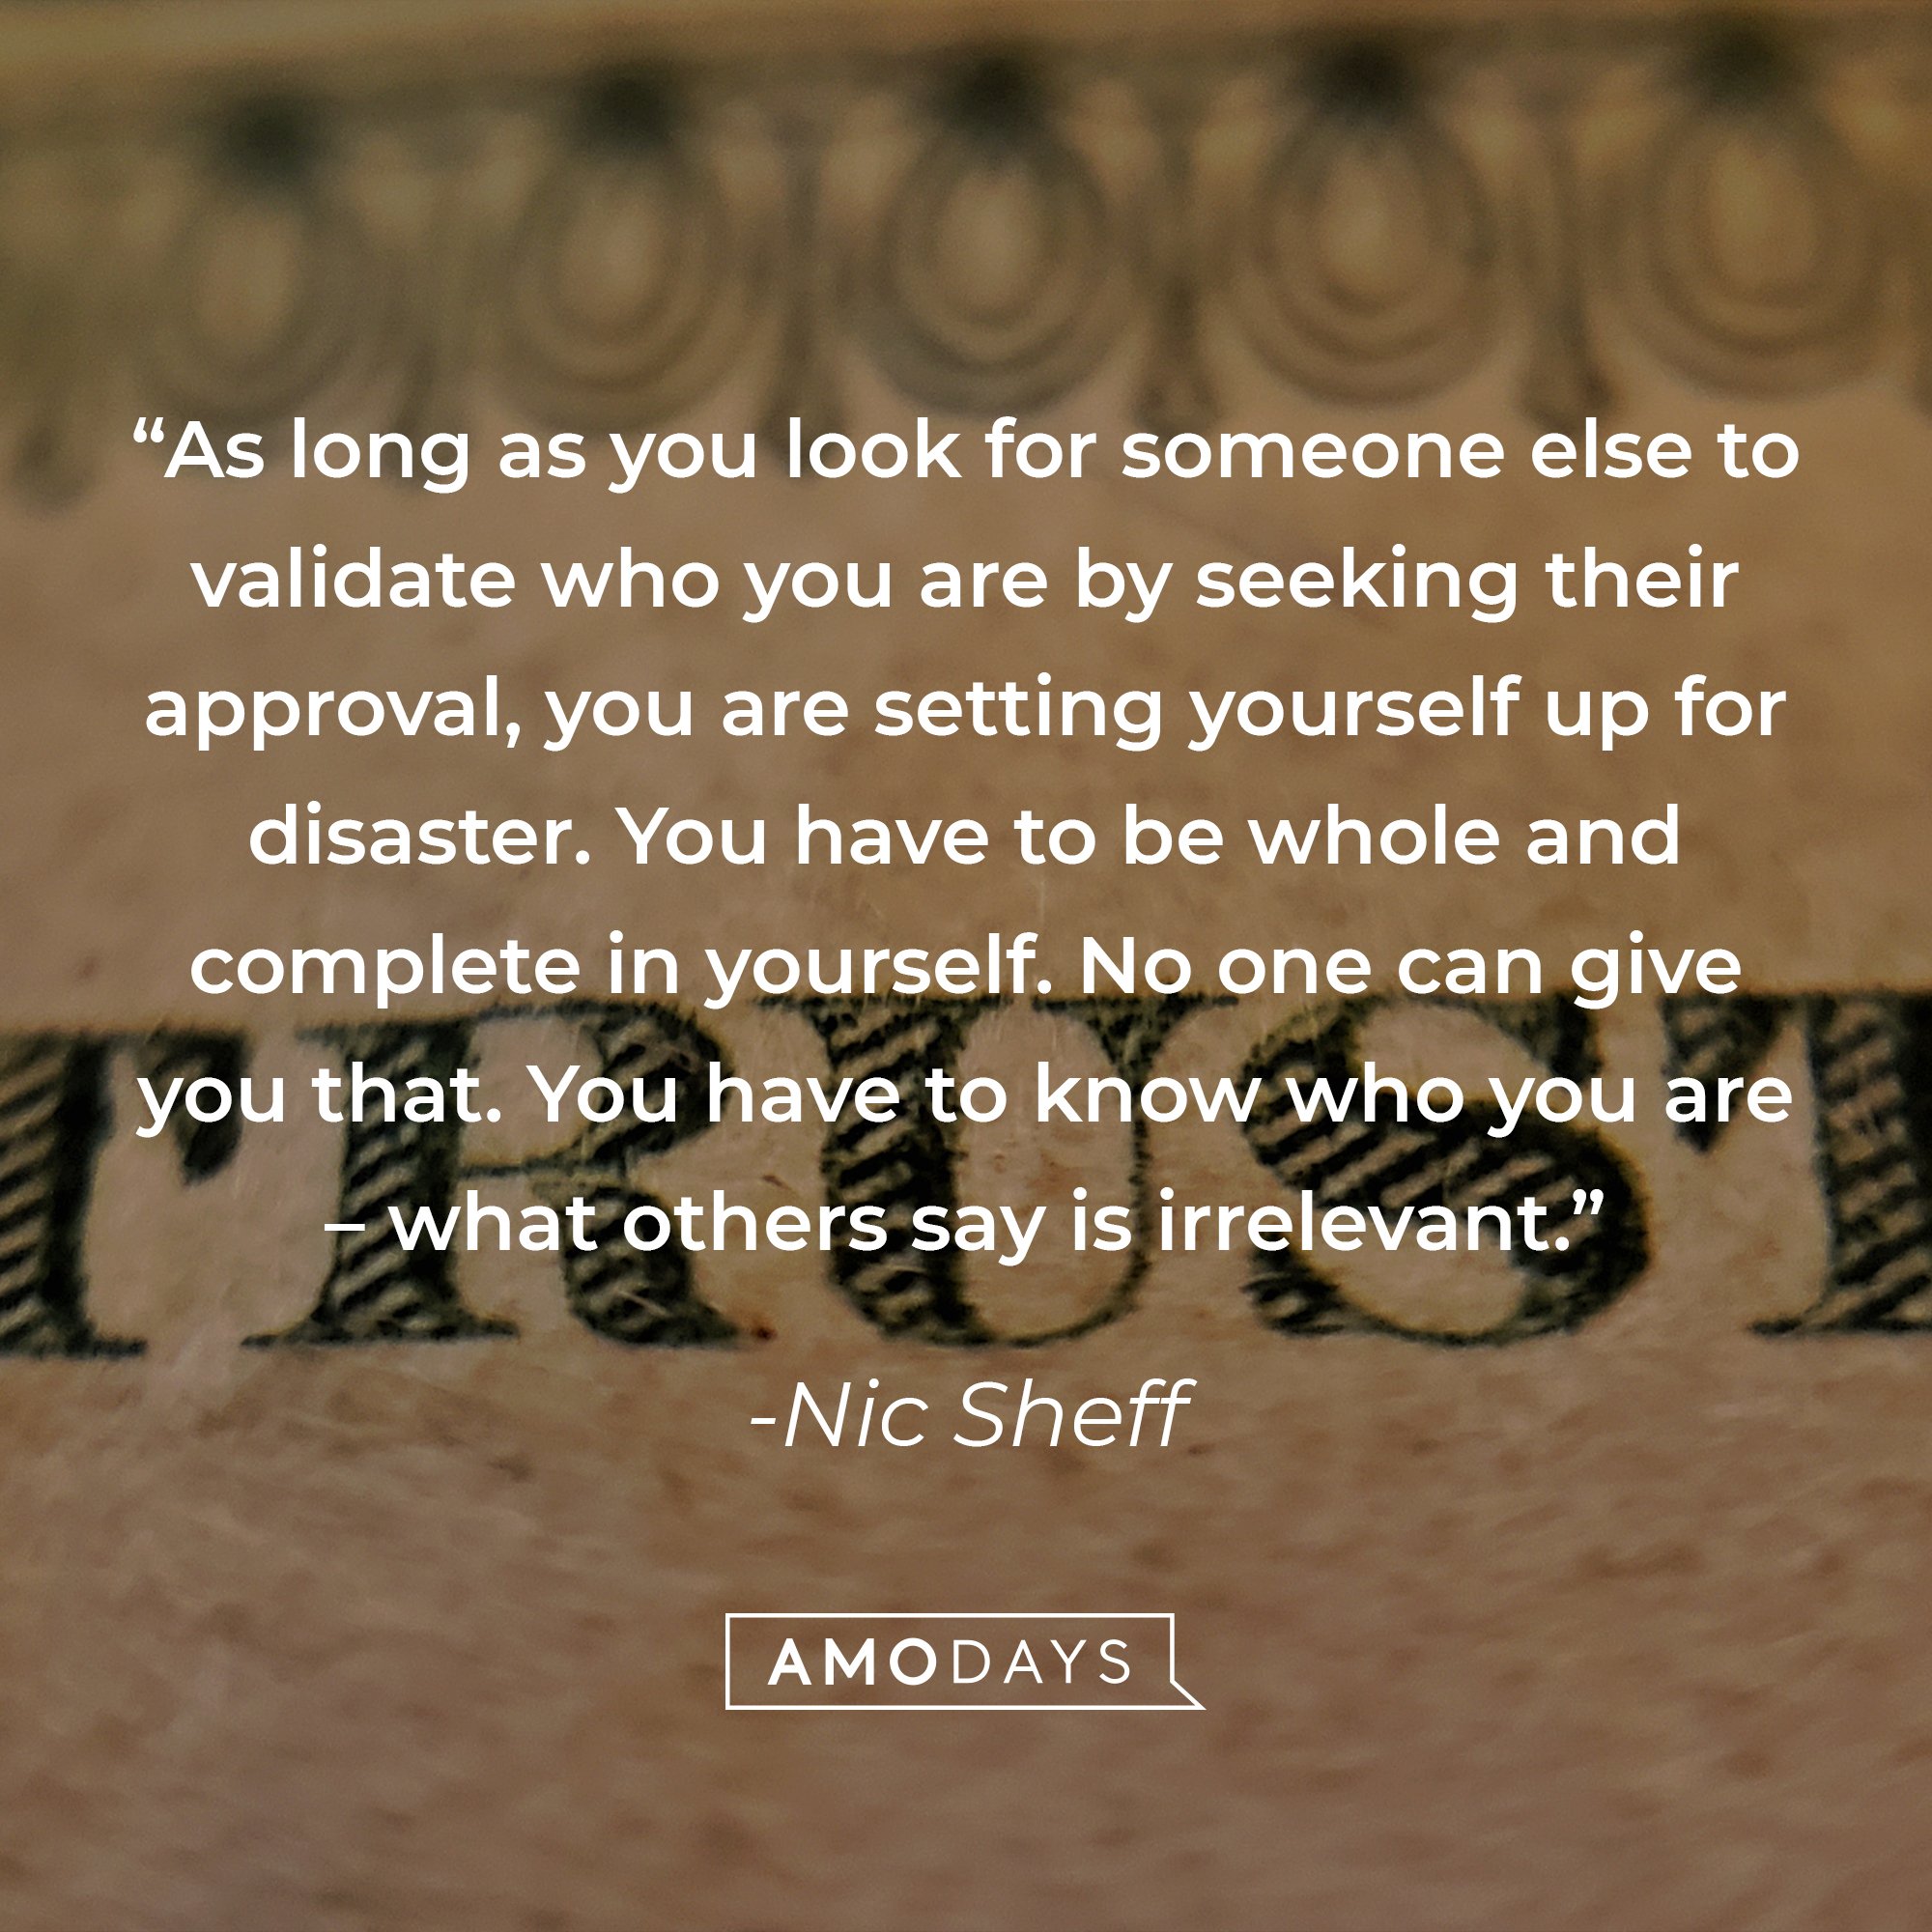 Nic Sheff's quote: “As long as you look for someone else to validate who you are by seeking their approval, you are setting yourself up for disaster. You have to be whole and complete in yourself. No one can give you that. You have to know who you are – what others say is irrelevant.” | Image: AmoDays